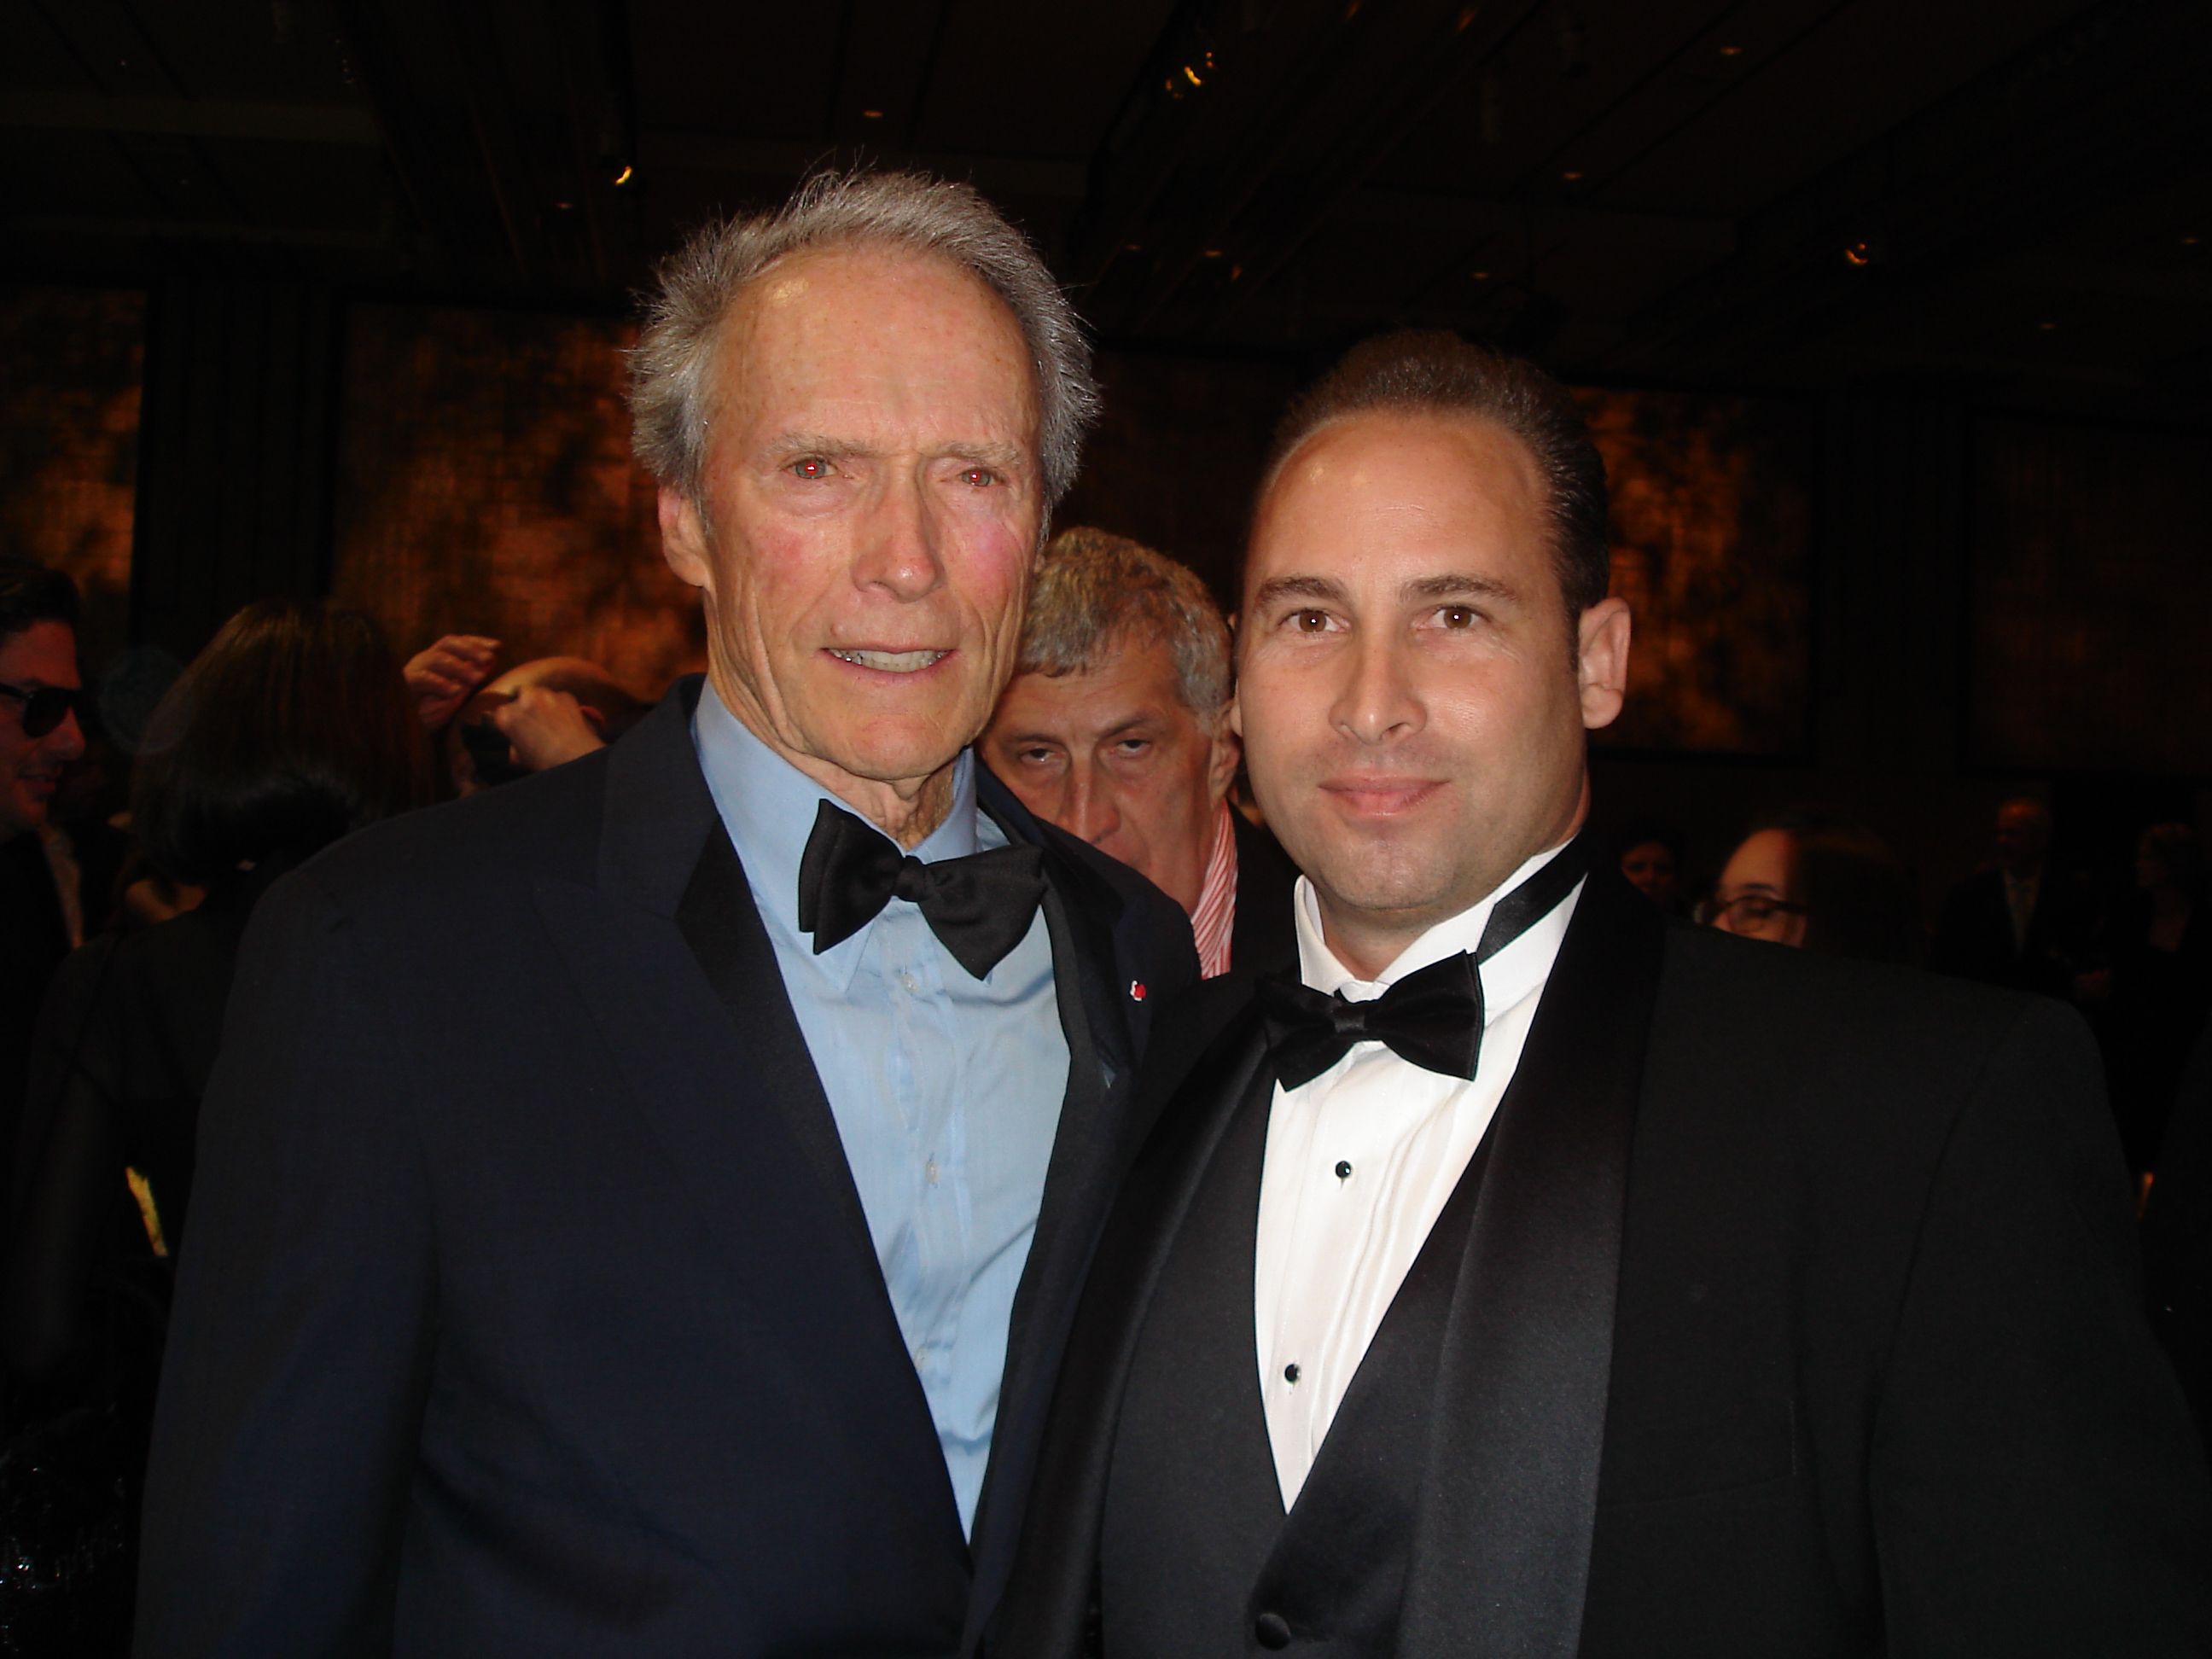 Director Steve Race with Director Clint eastwood